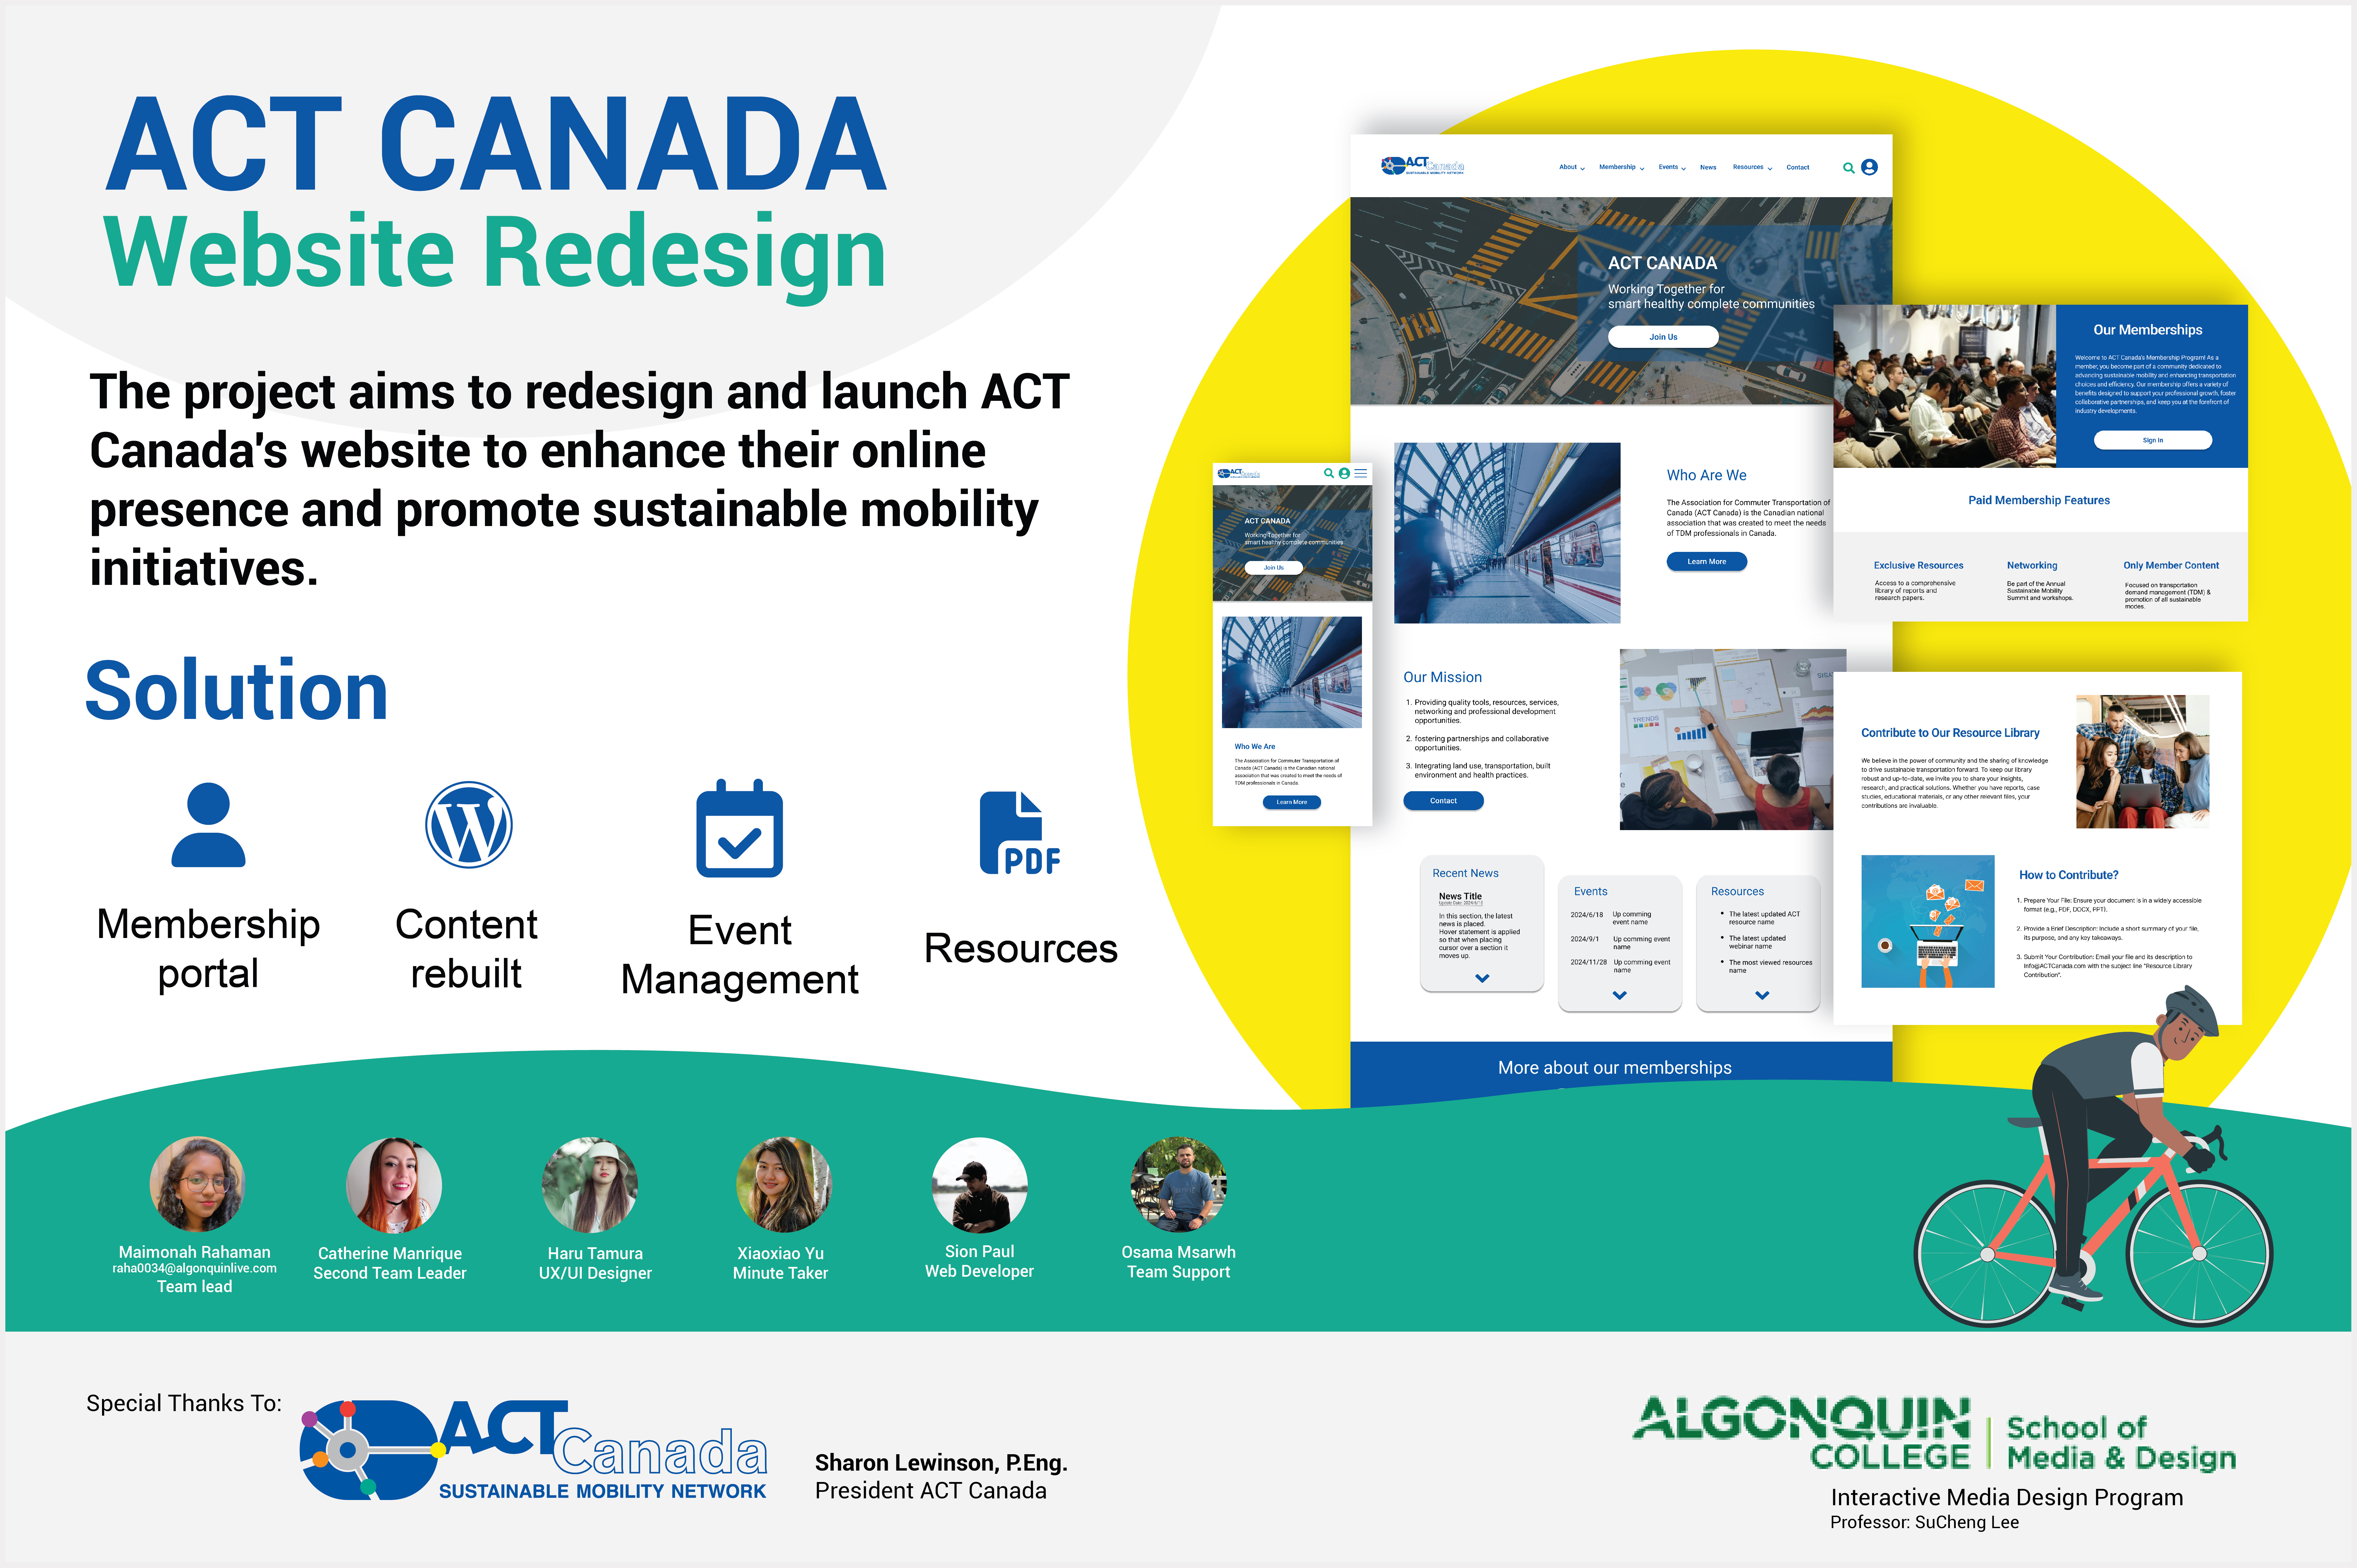 The image text provides a brief overview of the redesign project. On the right side, a hi-fi wireframe version of the homepage is visible, surrounded by round and colorful elements that complement the branding style. At the bottom right of the image, there is a free vector illustration of a cyclist,